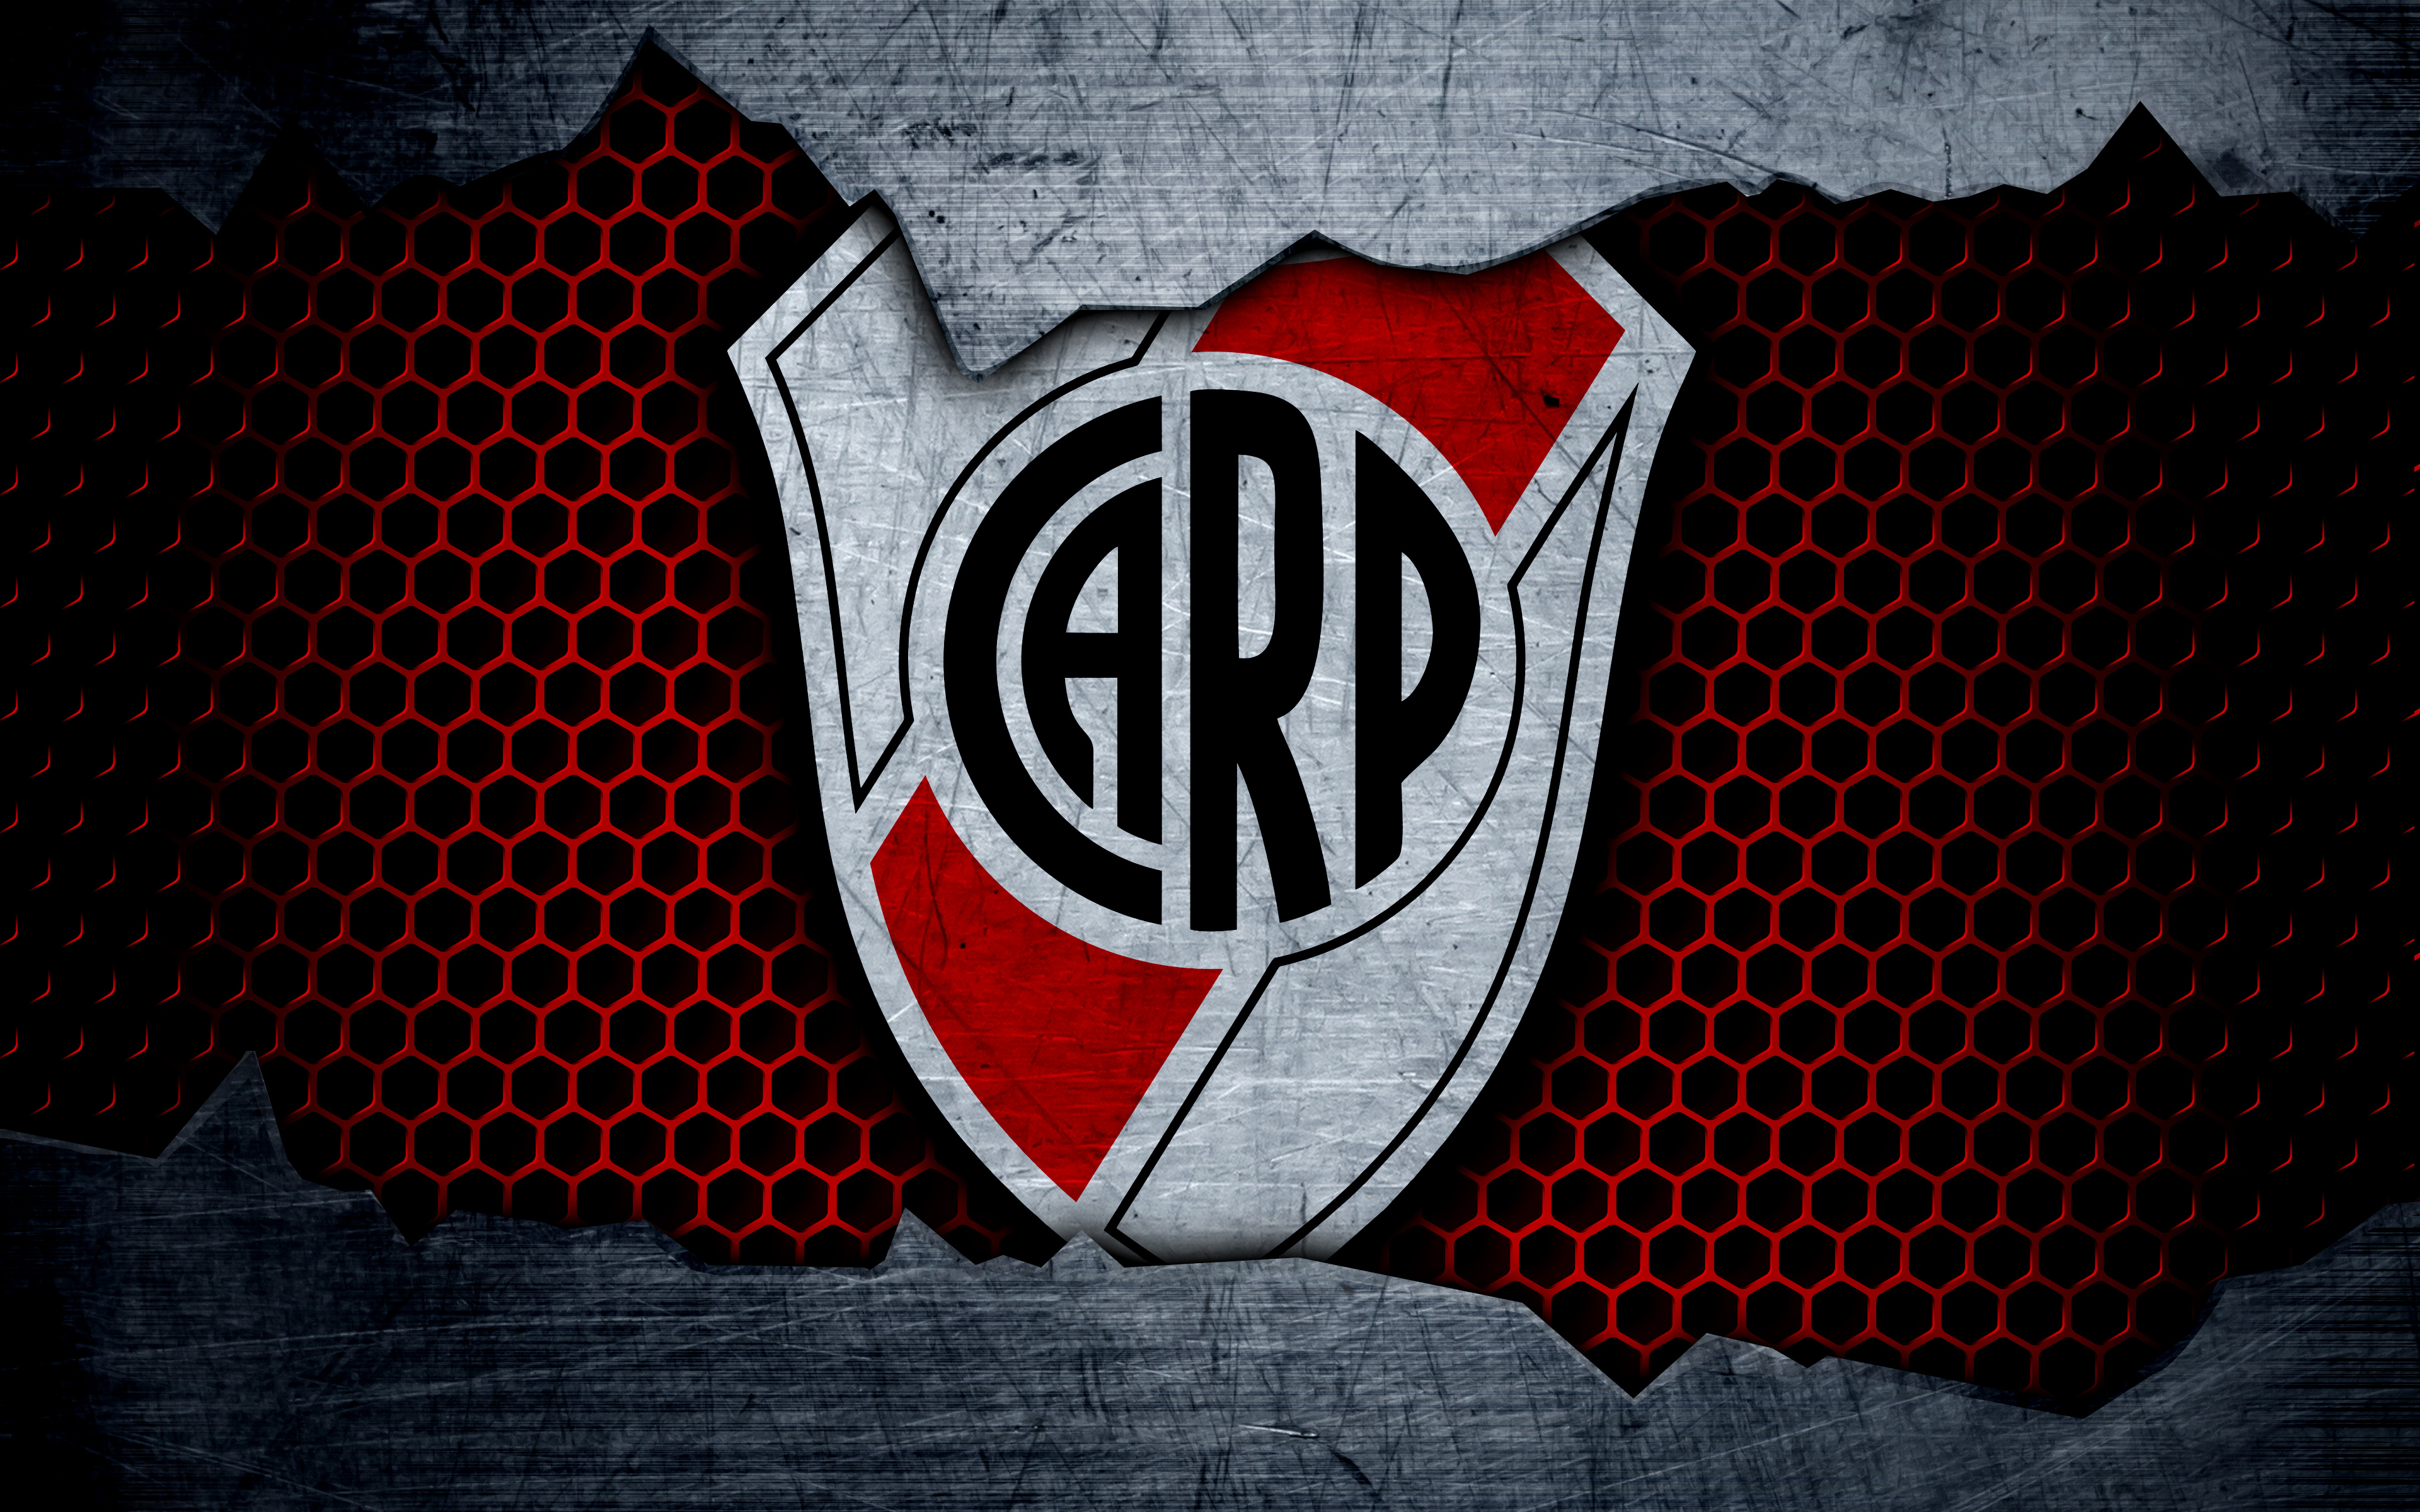 Club Atlético River Plate wallpapers for desktop, download free Club  Atlético River Plate pictures and backgrounds for PC 